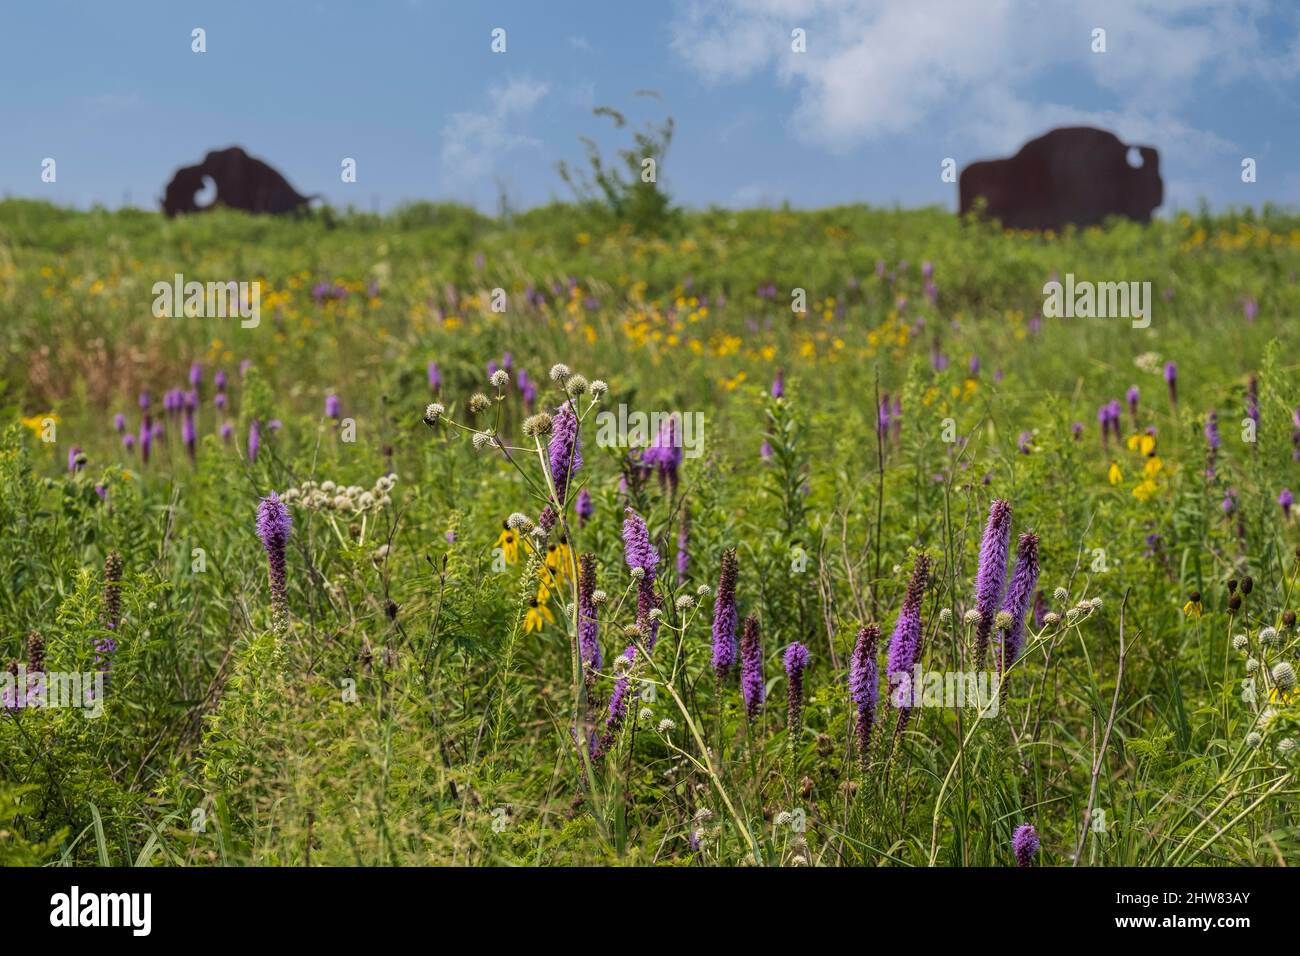 Prarie Grassland Wildflowers and Buffalo Sculpture, Missouri Welcome Center, Highway I-35. Stock Photo